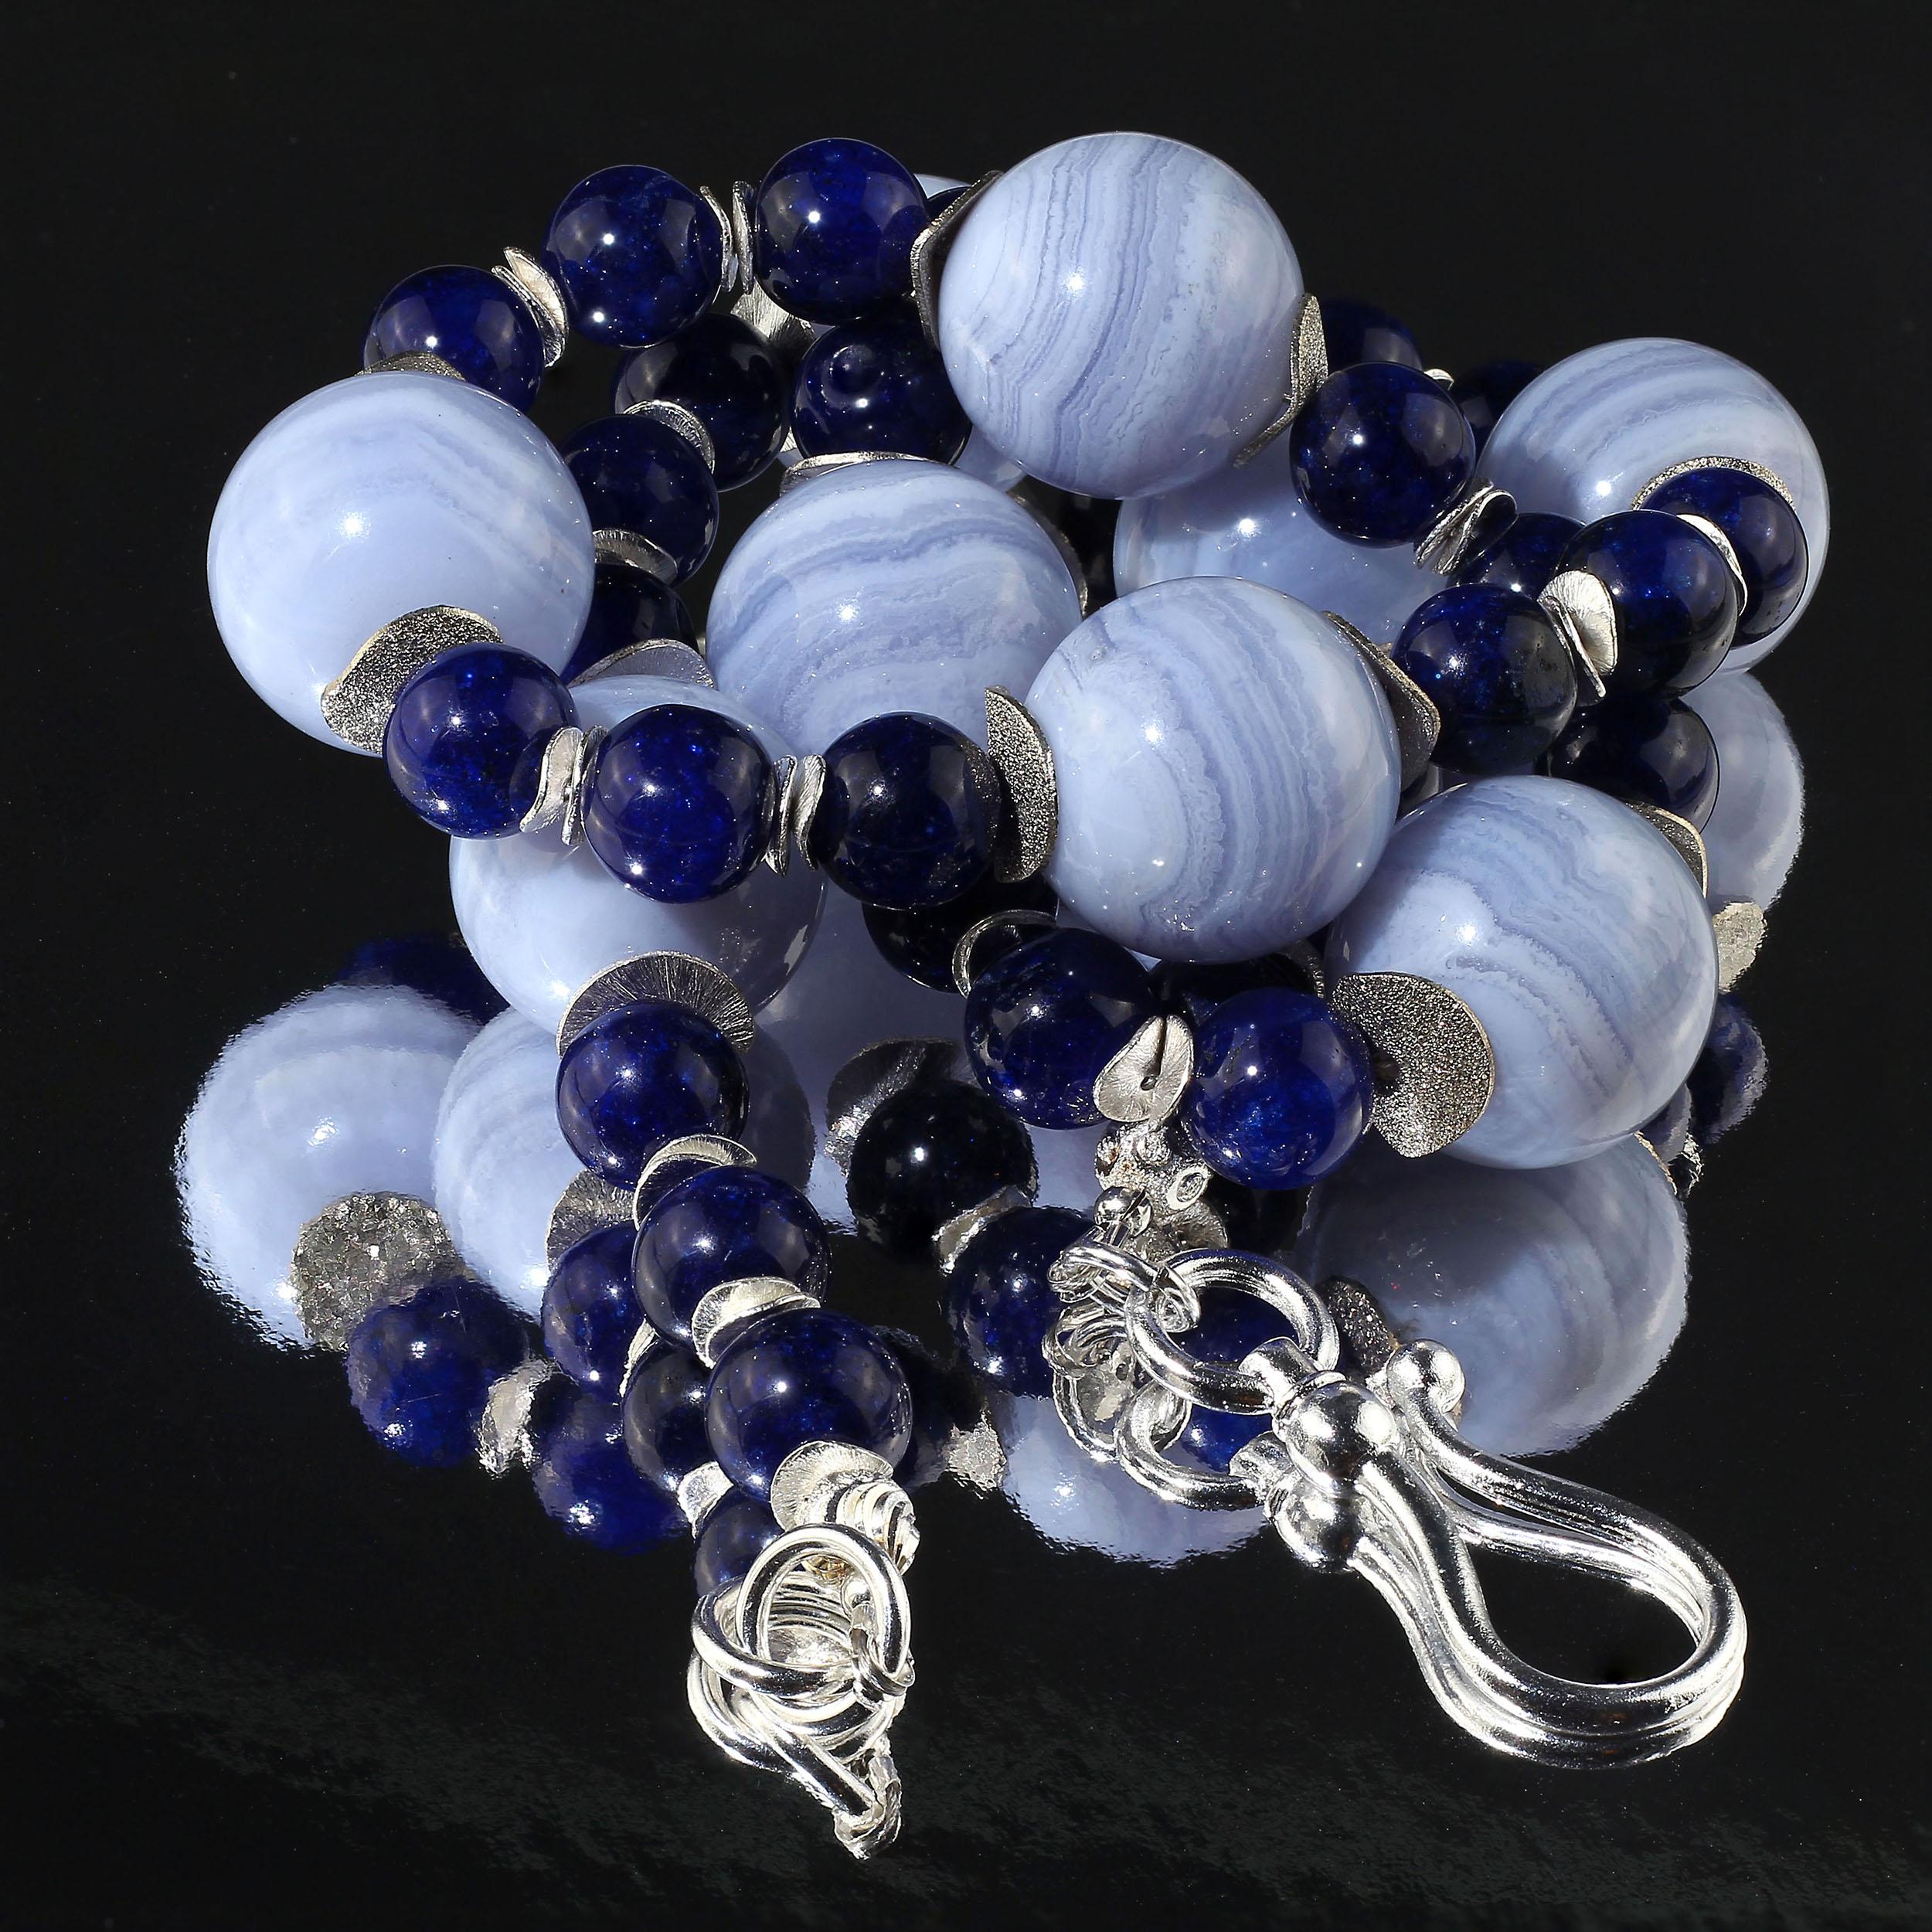 Always a Summer Favorite, Blue Lace Agate and Blue Agate necklace.  The 20 MM highly polished Blue Lace Agate is accompanied by highly polished dyed navy Agate.  The sparkling silver flutters enhance both blues.  At 23 inches this is a versatile